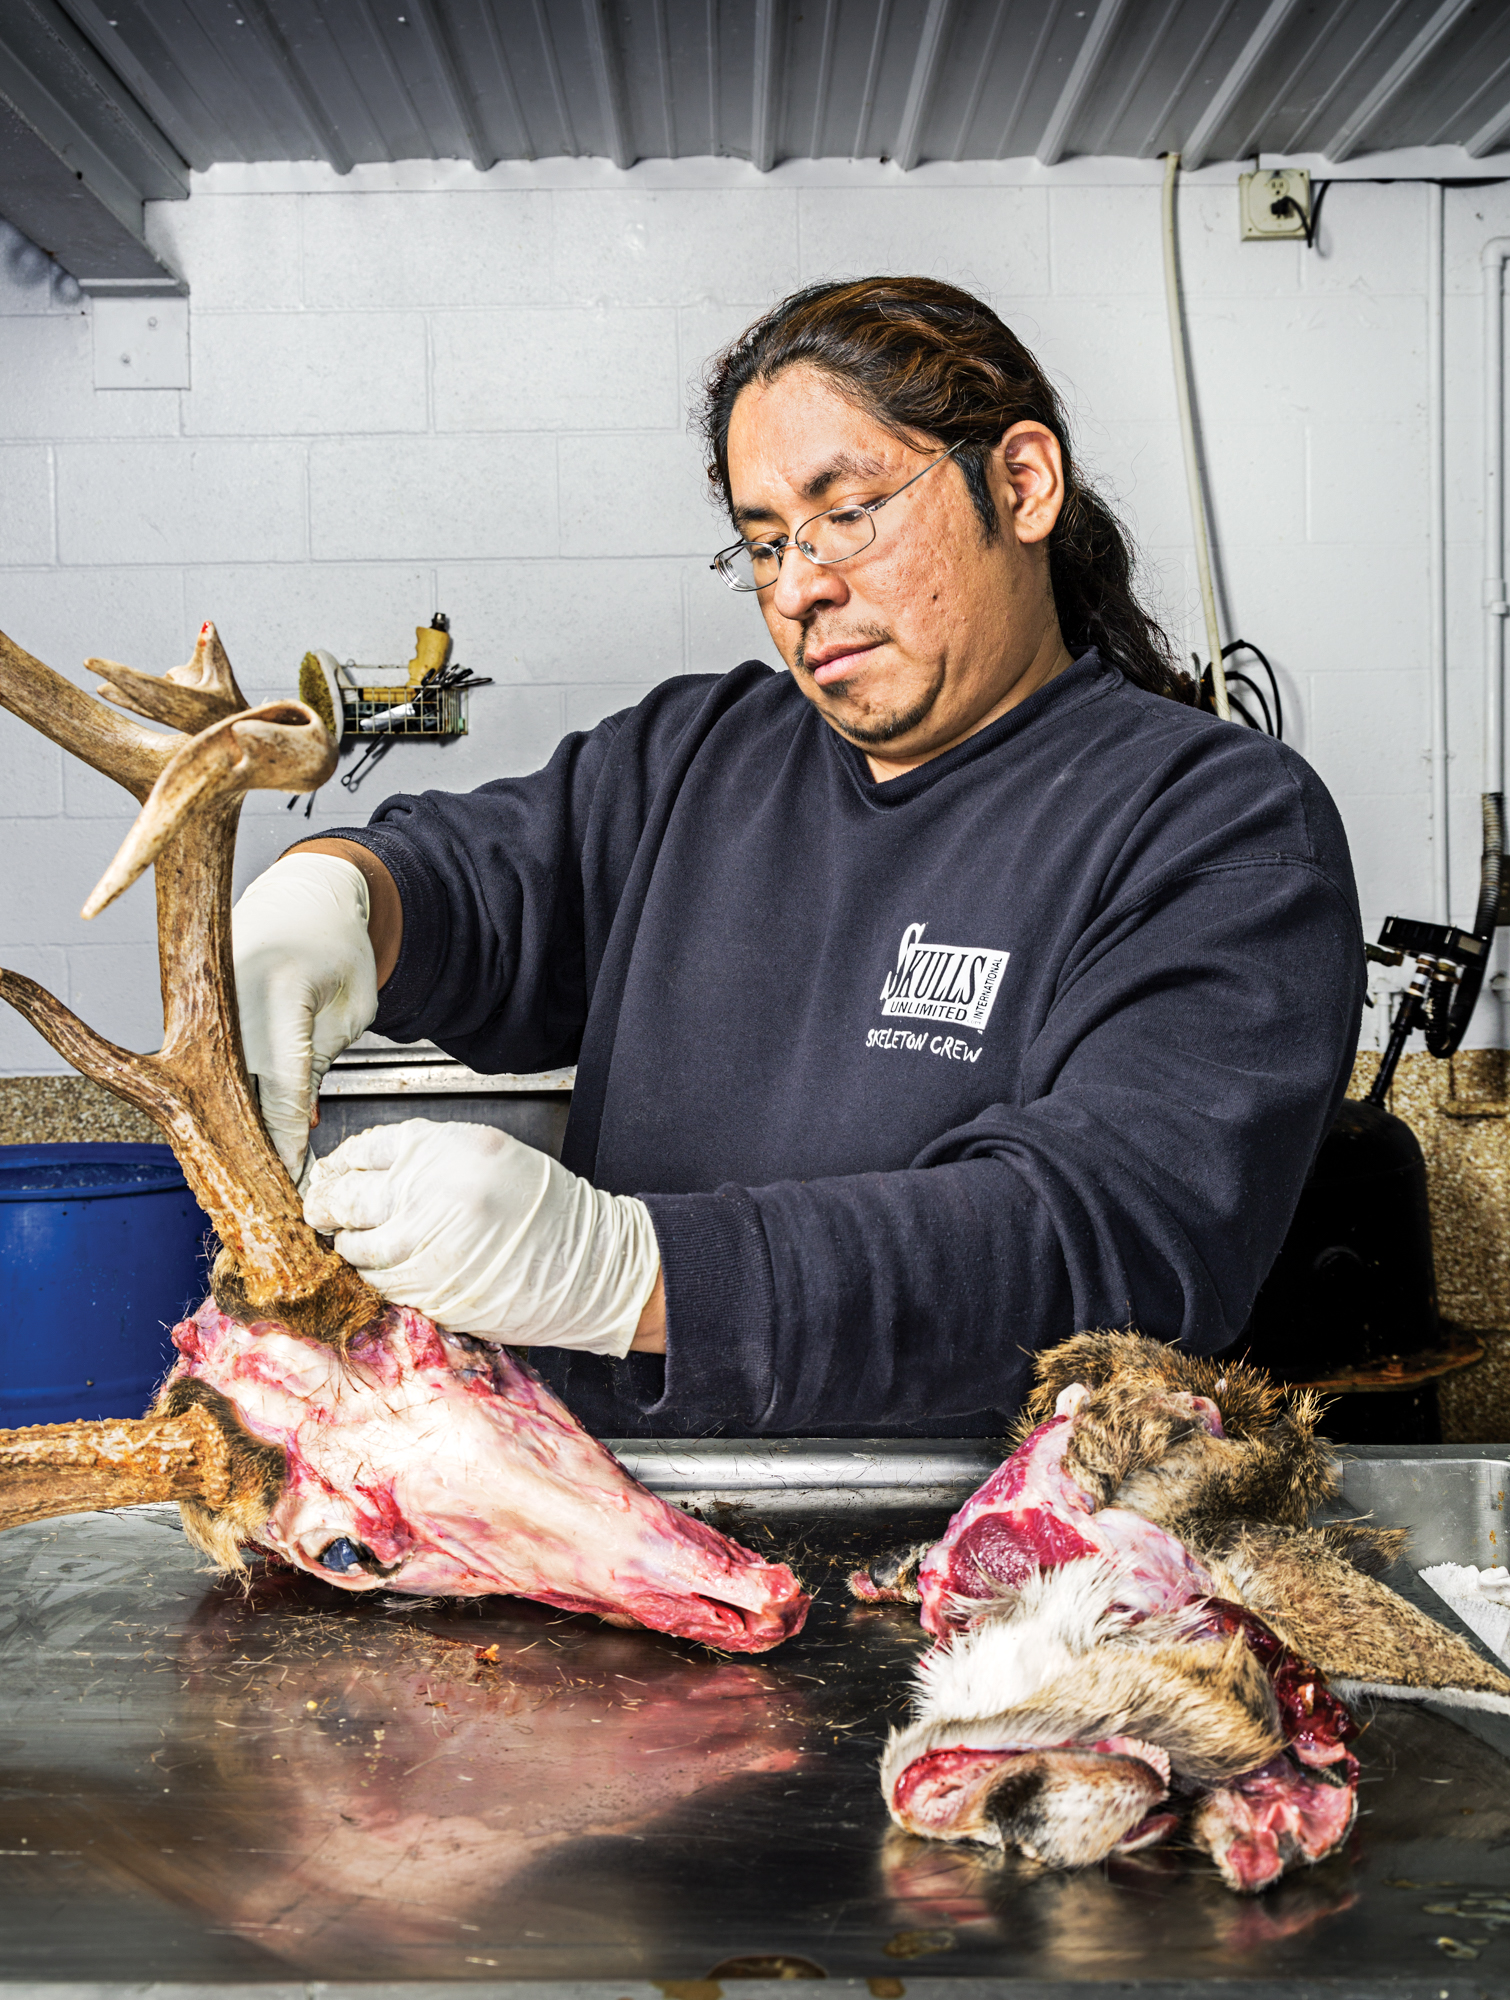 A man with gloves on cleans a European mount deer skull.